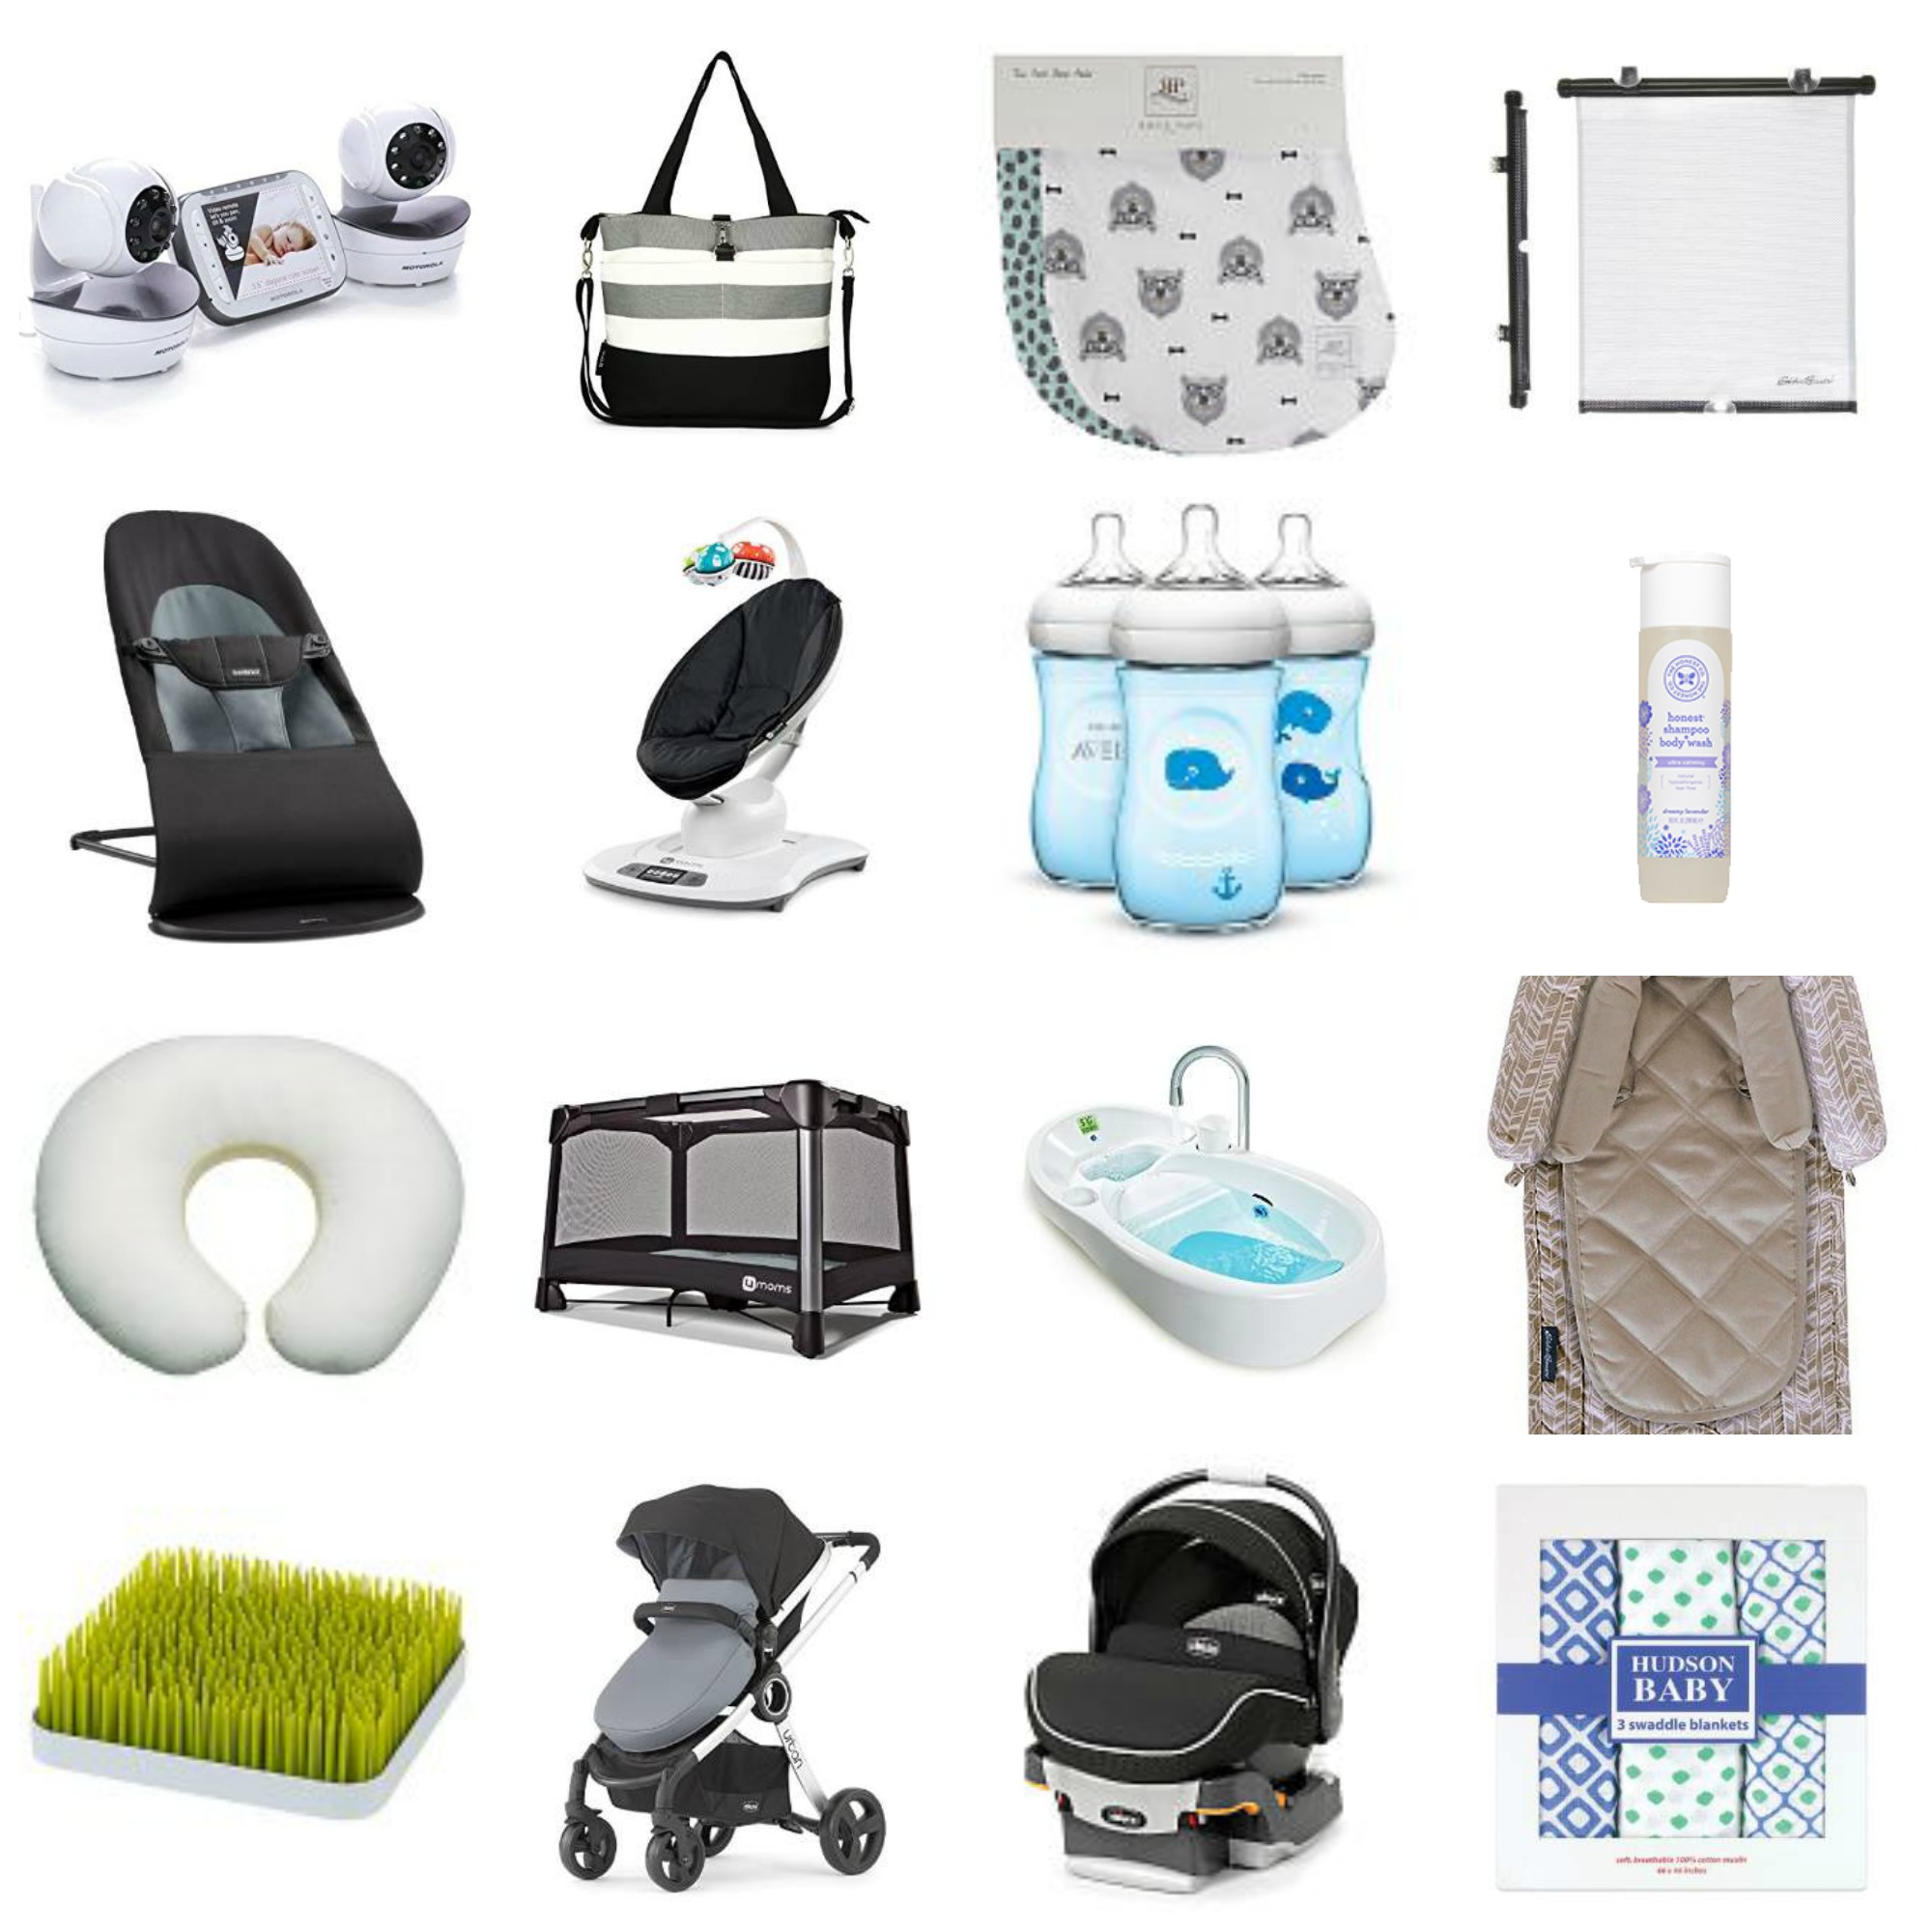 Tackling our baby essentials - The 